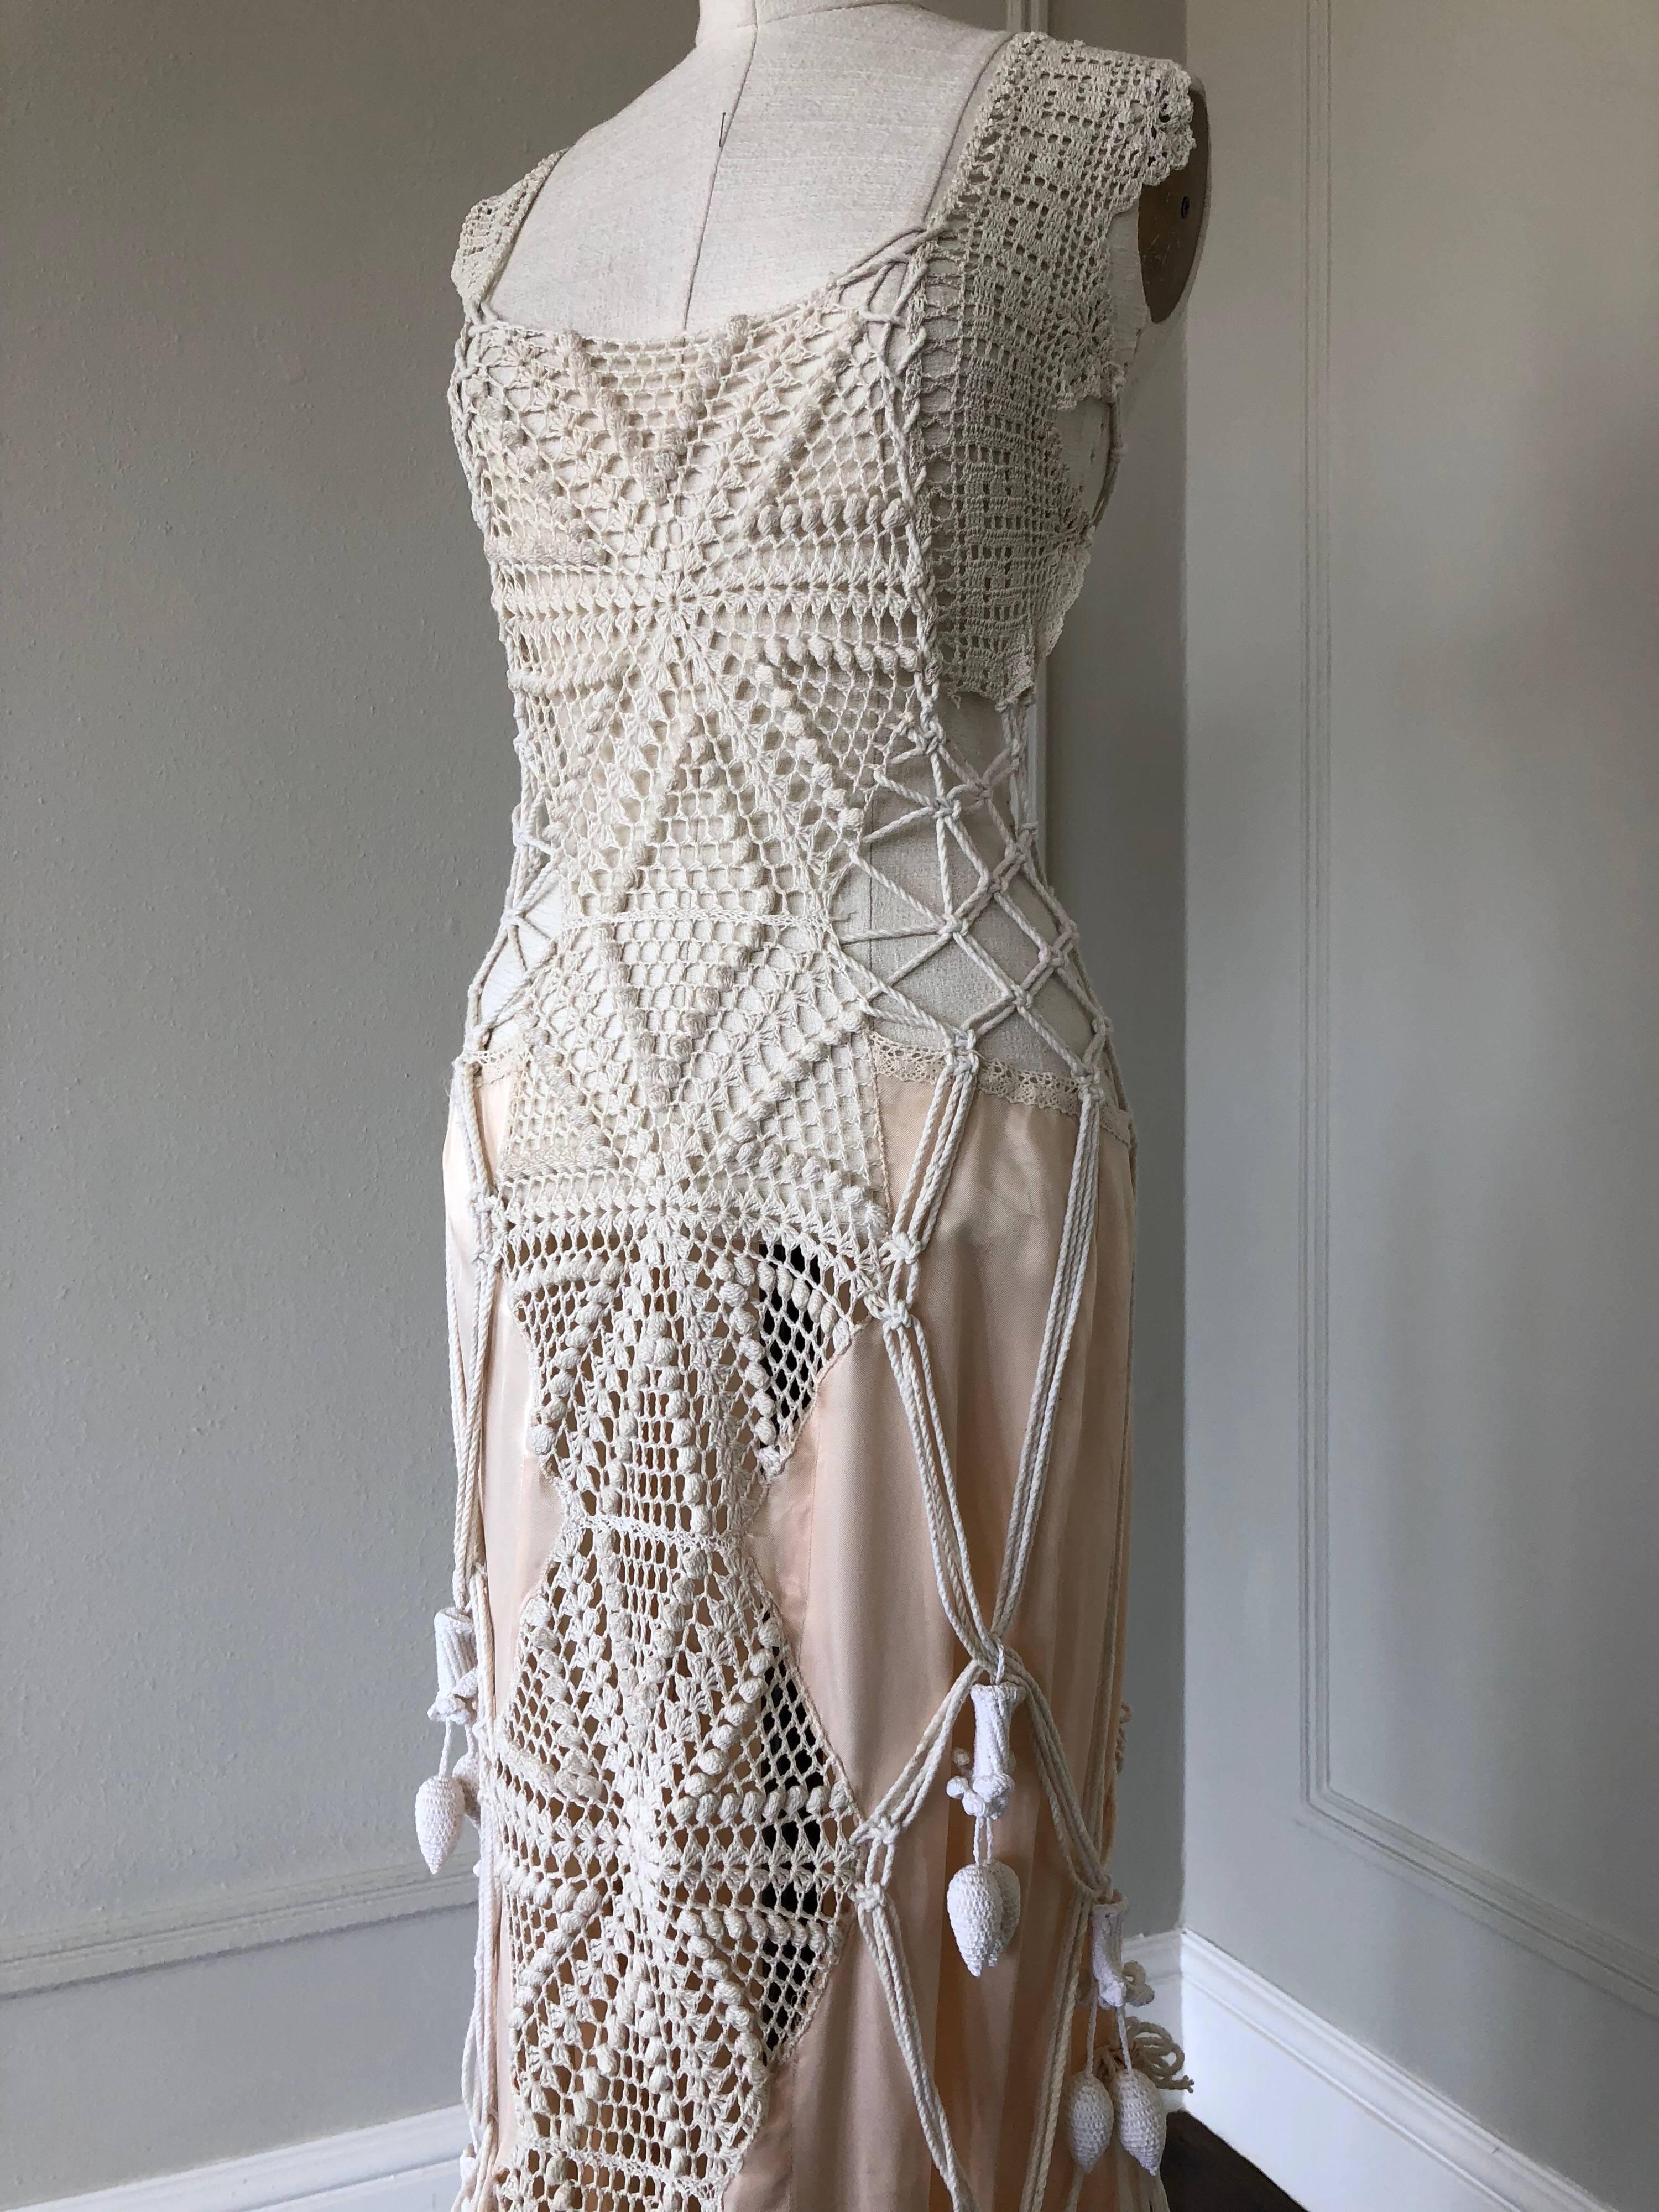 dress made of rope